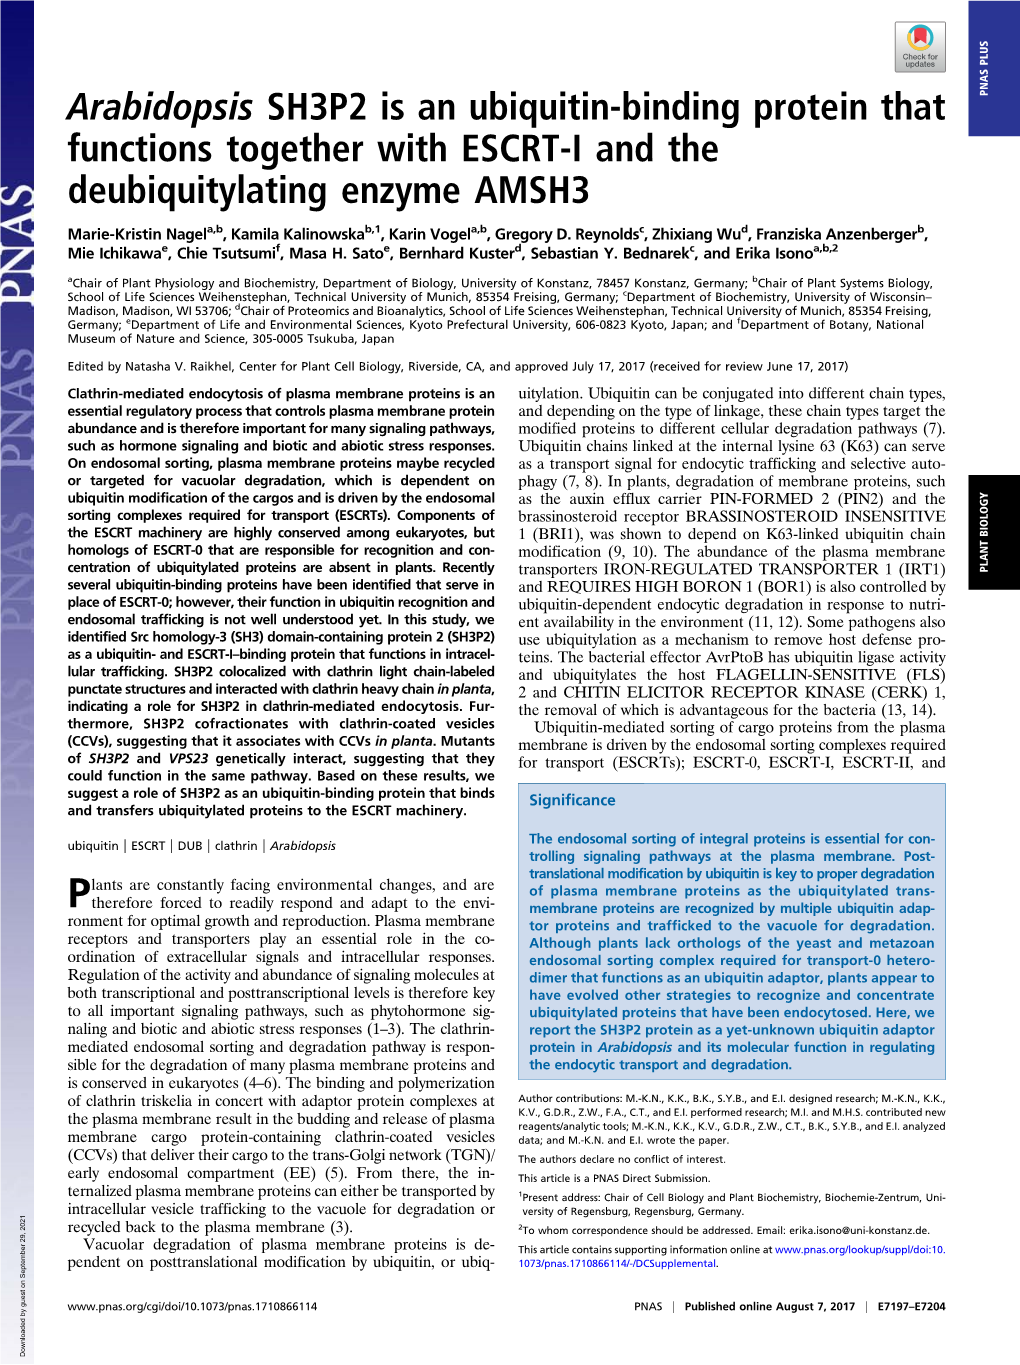 Arabidopsis SH3P2 Is an Ubiquitin-Binding Protein That Functions Together with ESCRT-I and the Deubiquitylating Enzyme AMSH3